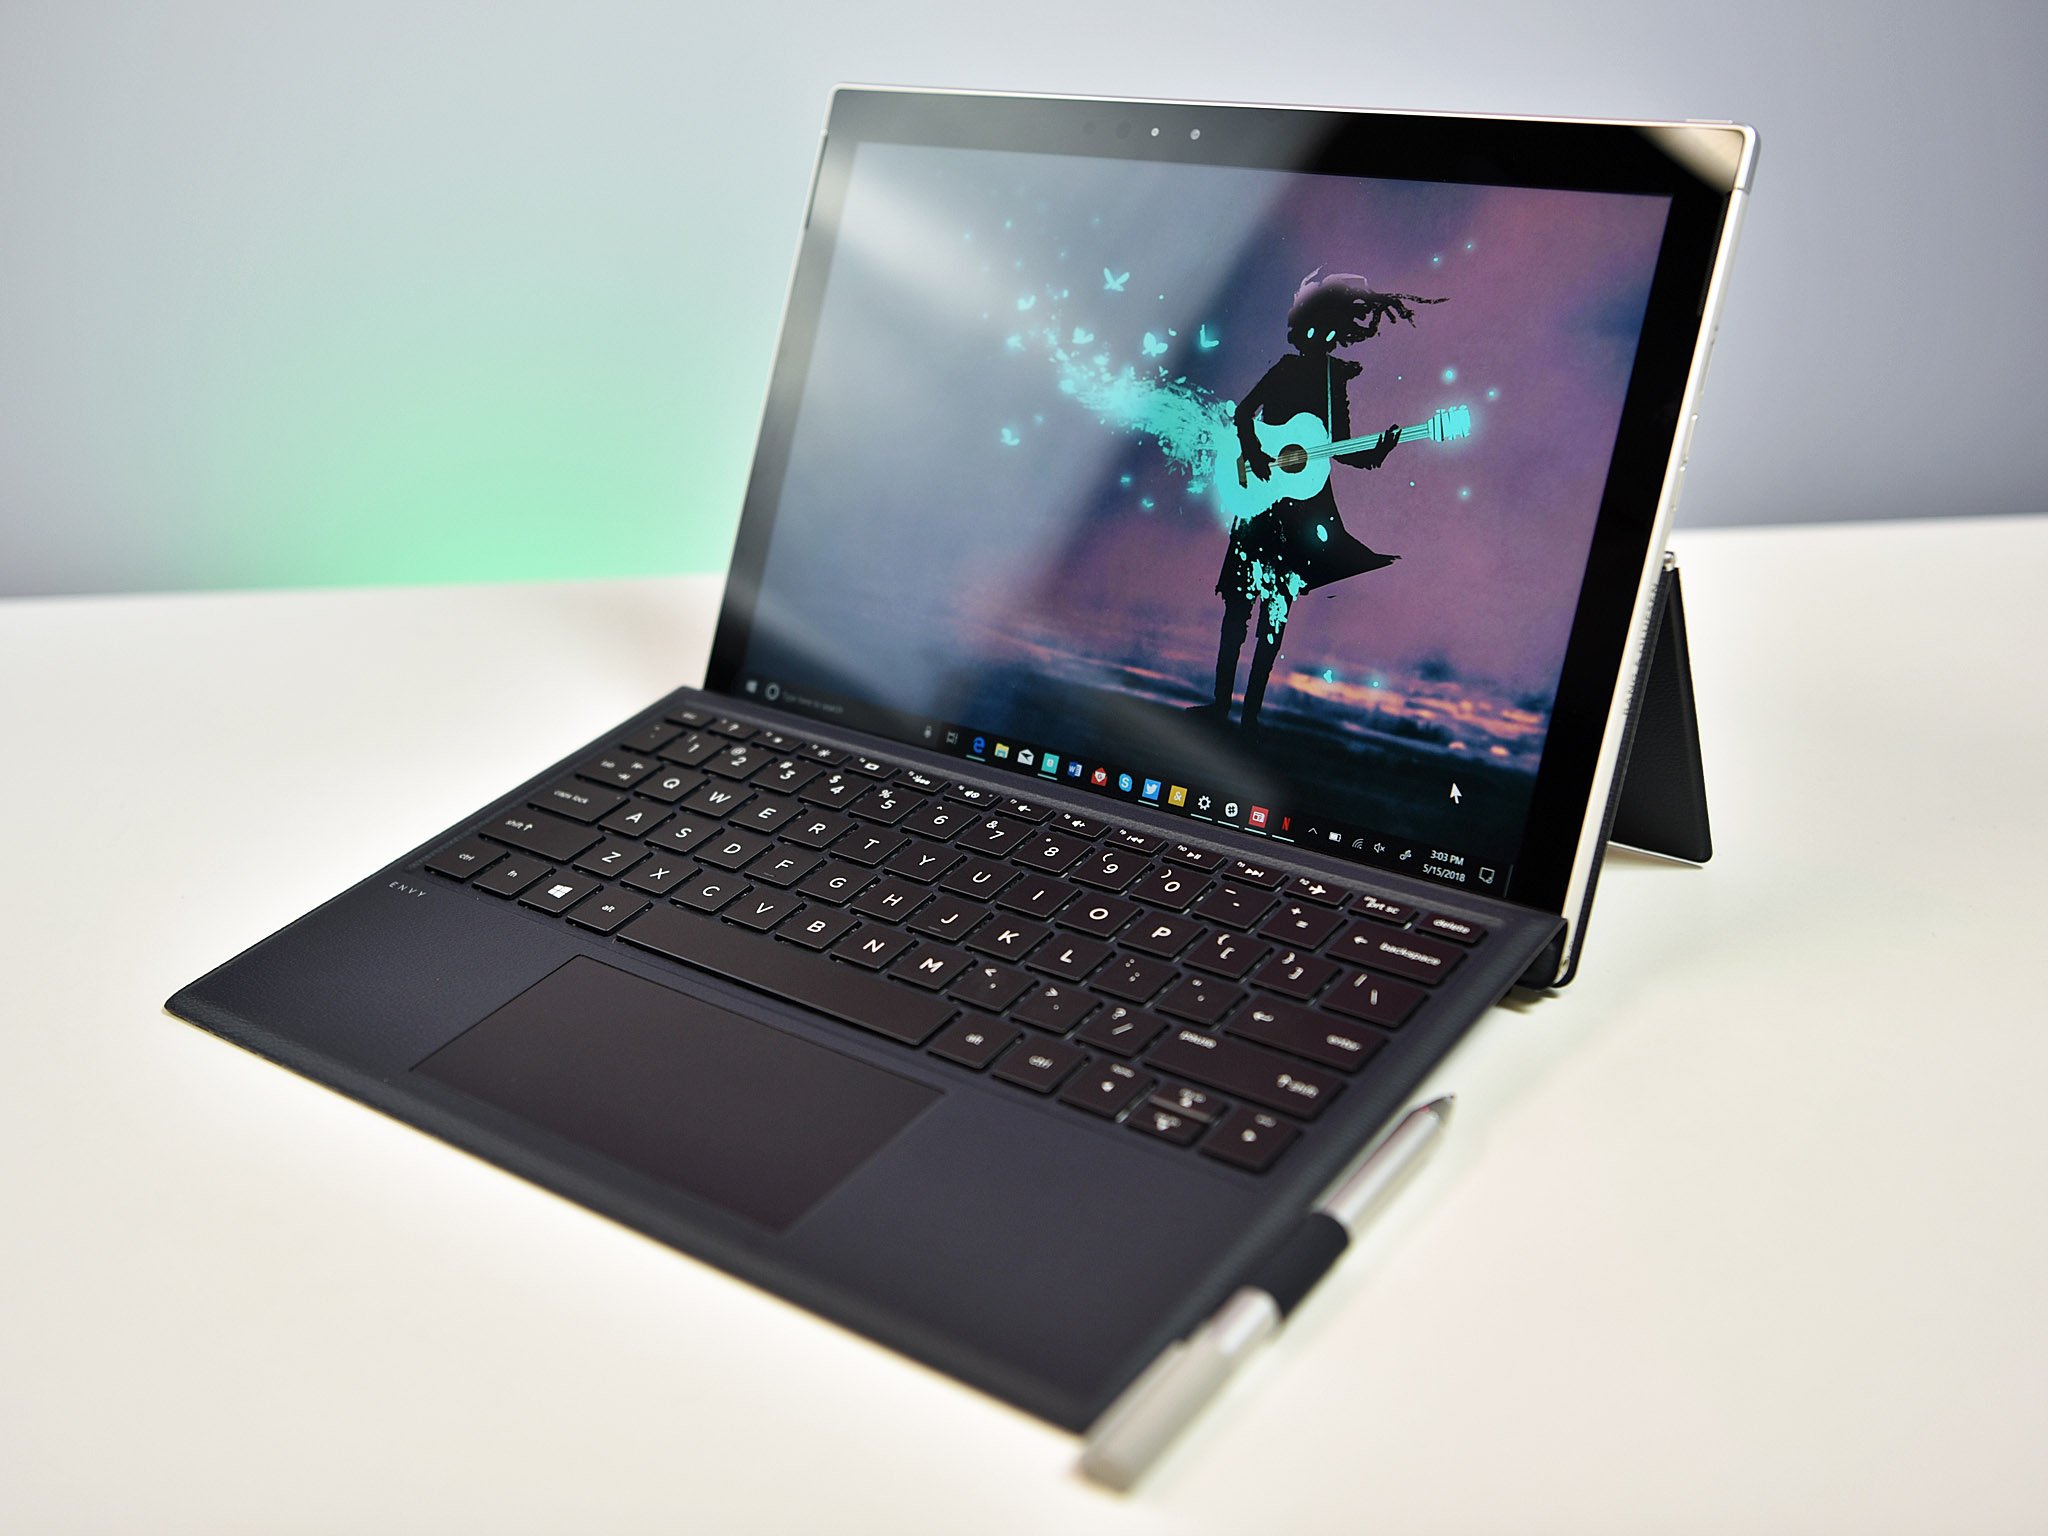 ASUS NovaGo, HP Envy x2 Always Connected PCs now available at Microsoft Store